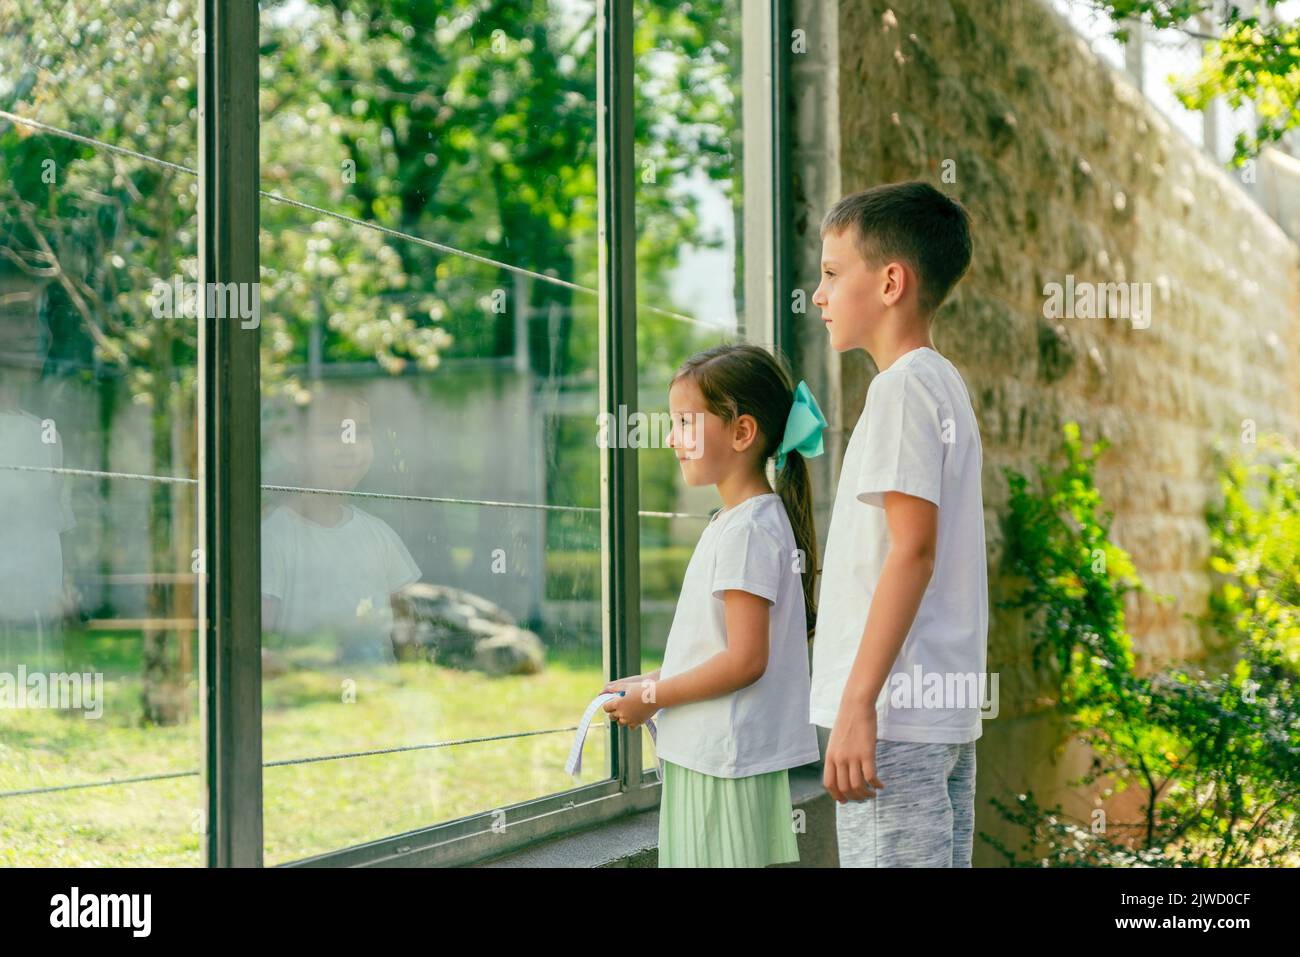 Children watch the animals in the zoo through a protective glass fence Stock Photo